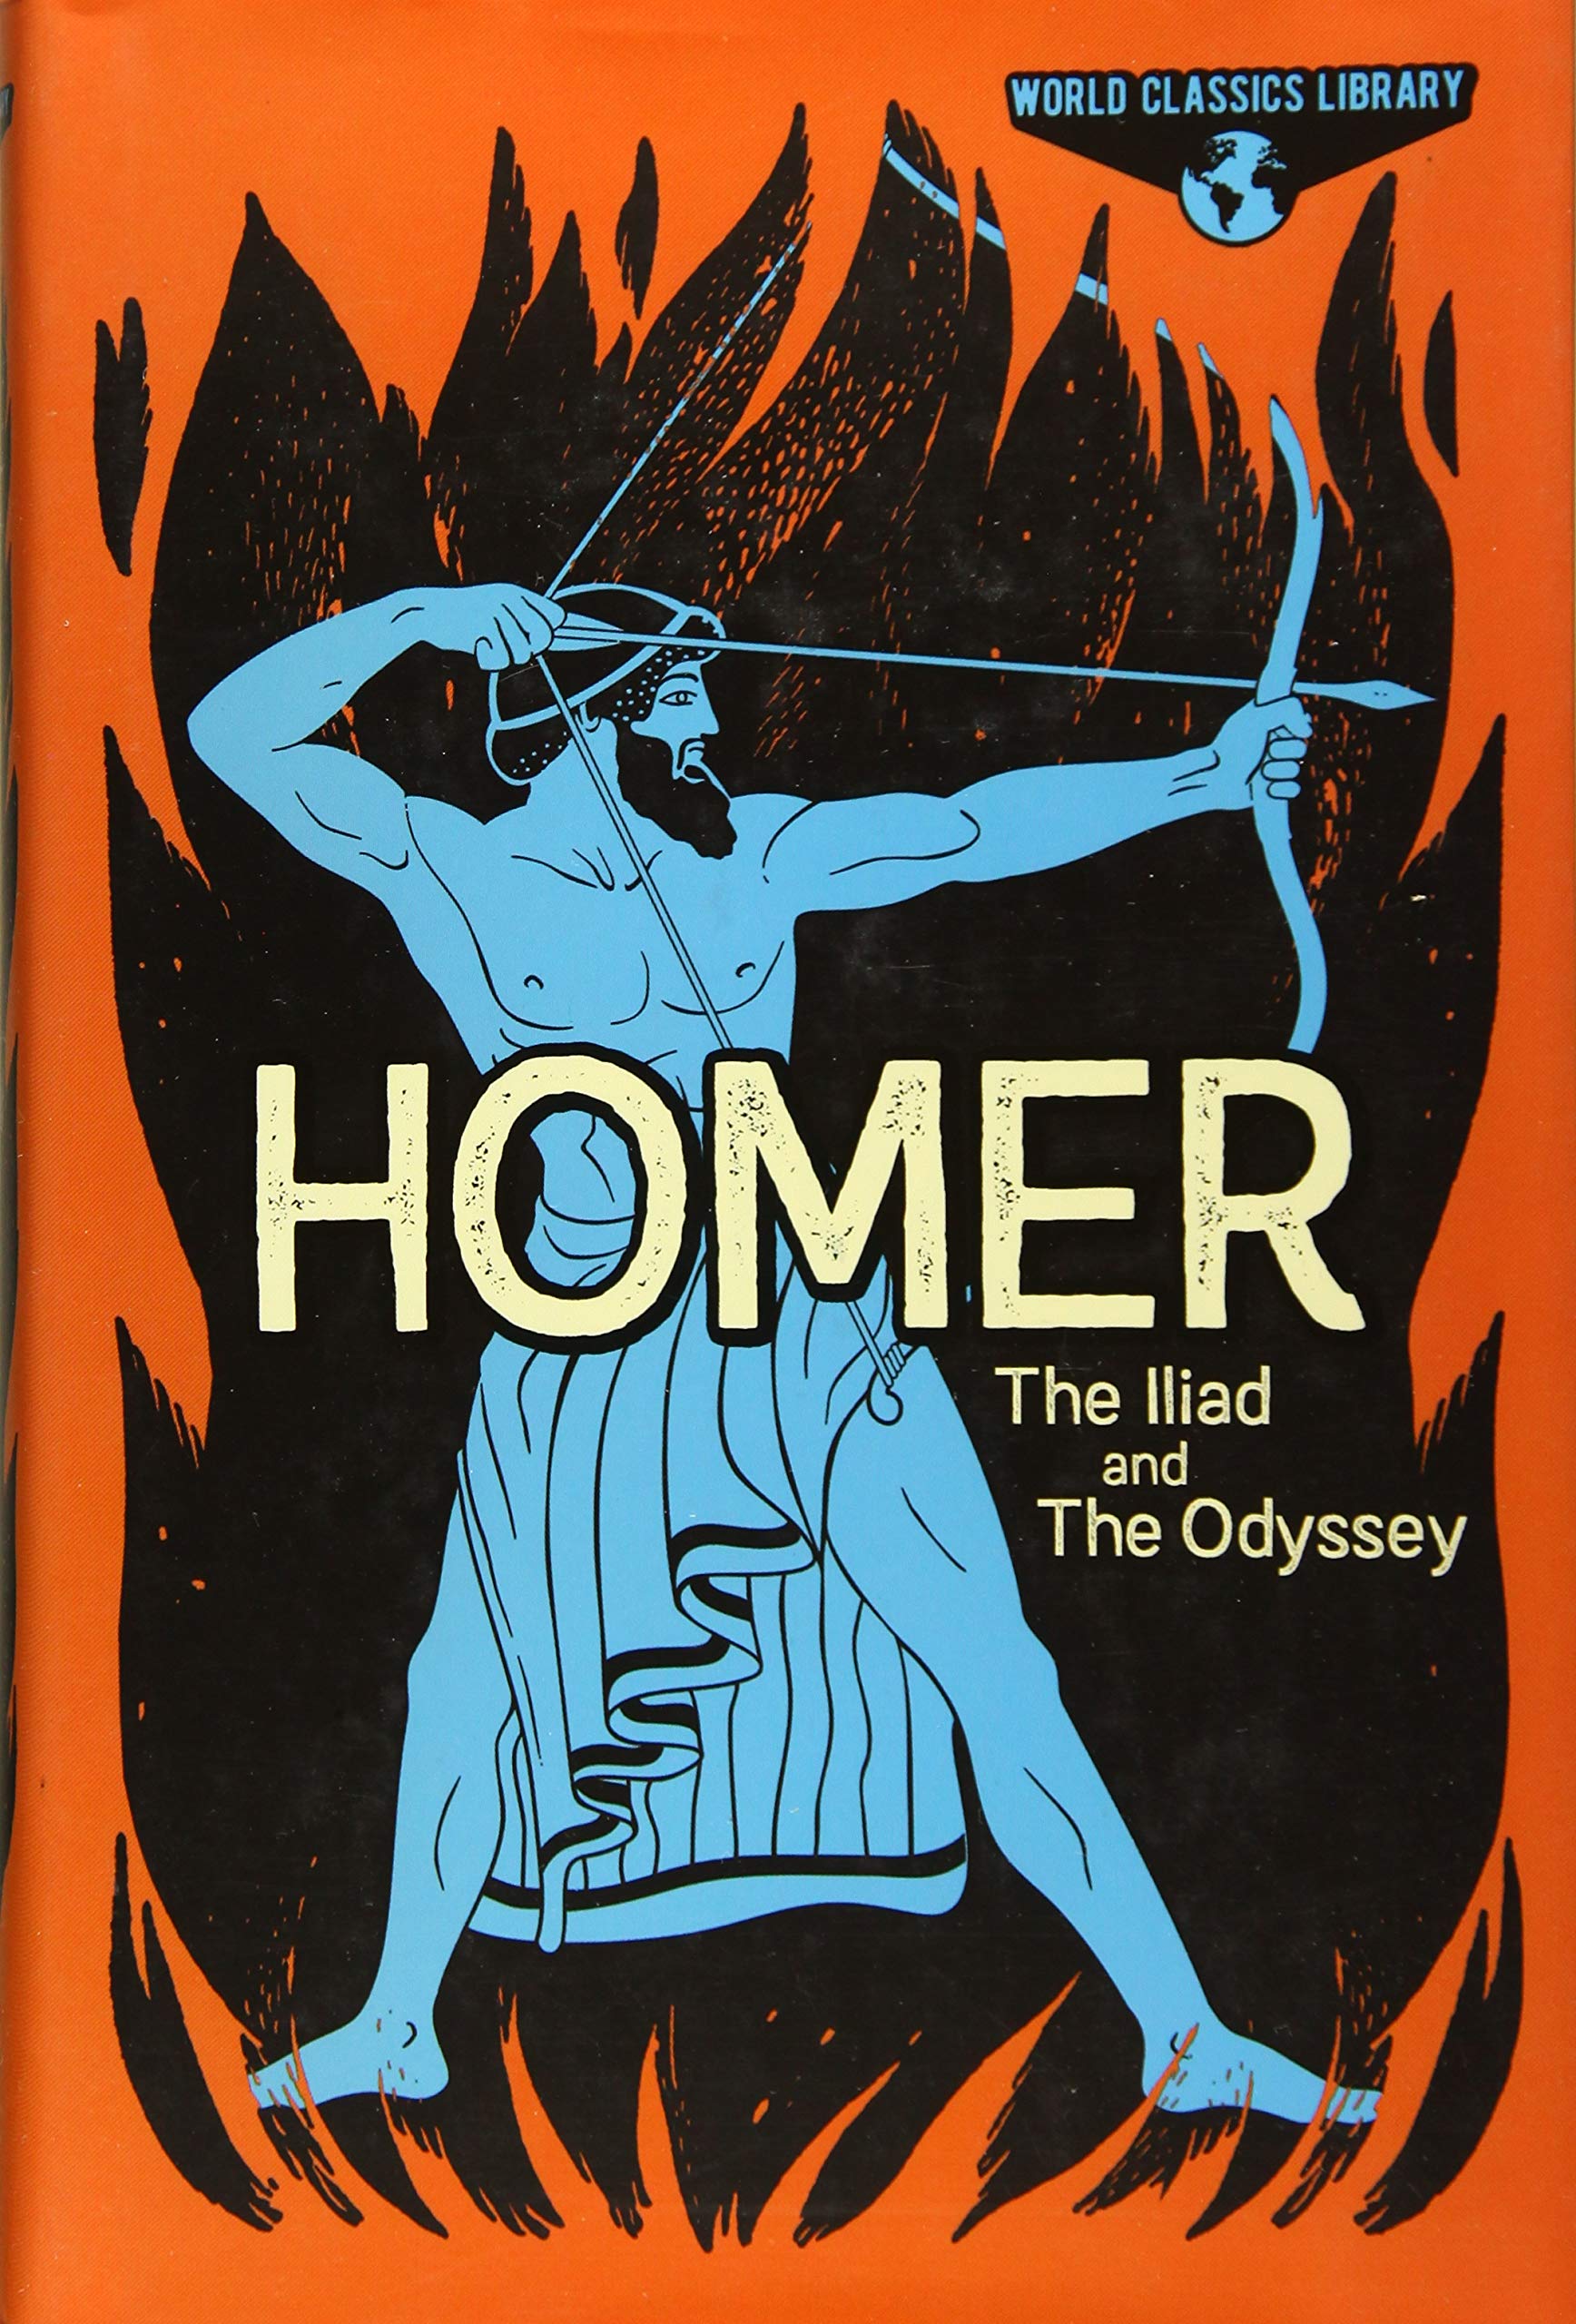 World Classics Library: Homer: The Illiad and The Odyssey | Homer image2